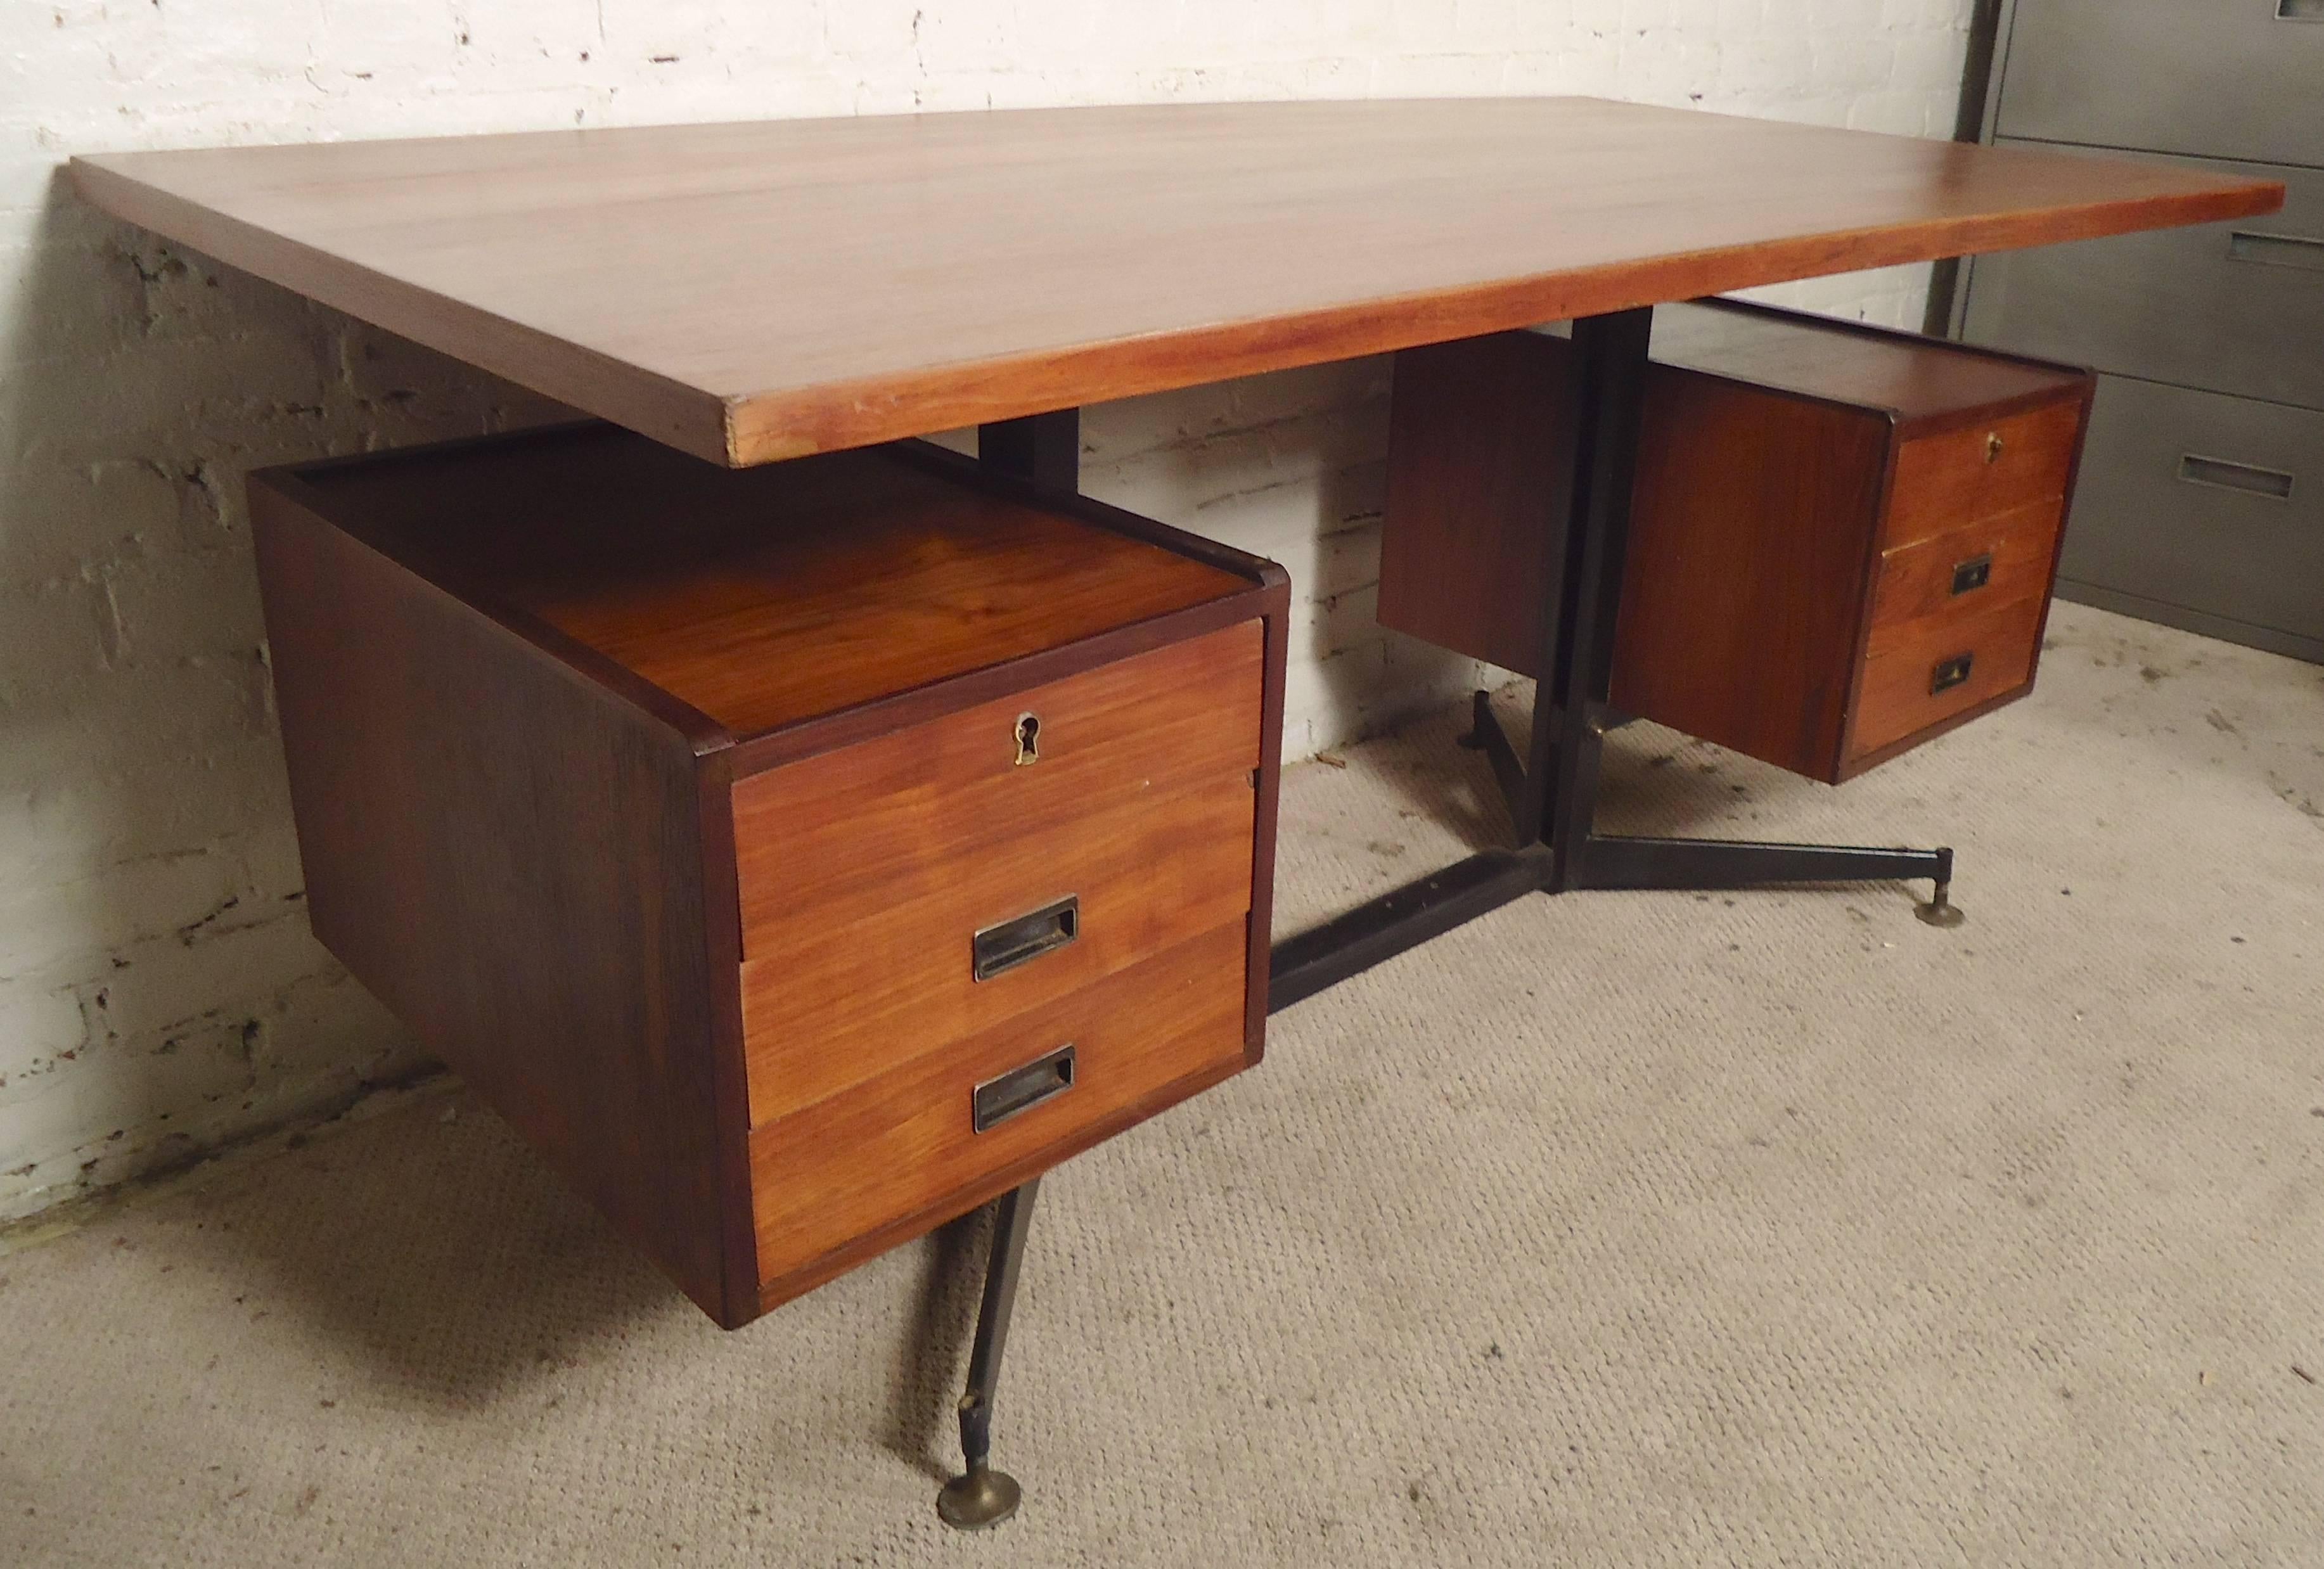 Gorgeous teak desk with Antonio Fornaroli design. Long teak top, floating attached drawers, iron frame.

(Please confirm item location - NY or NJ - with dealer).
 